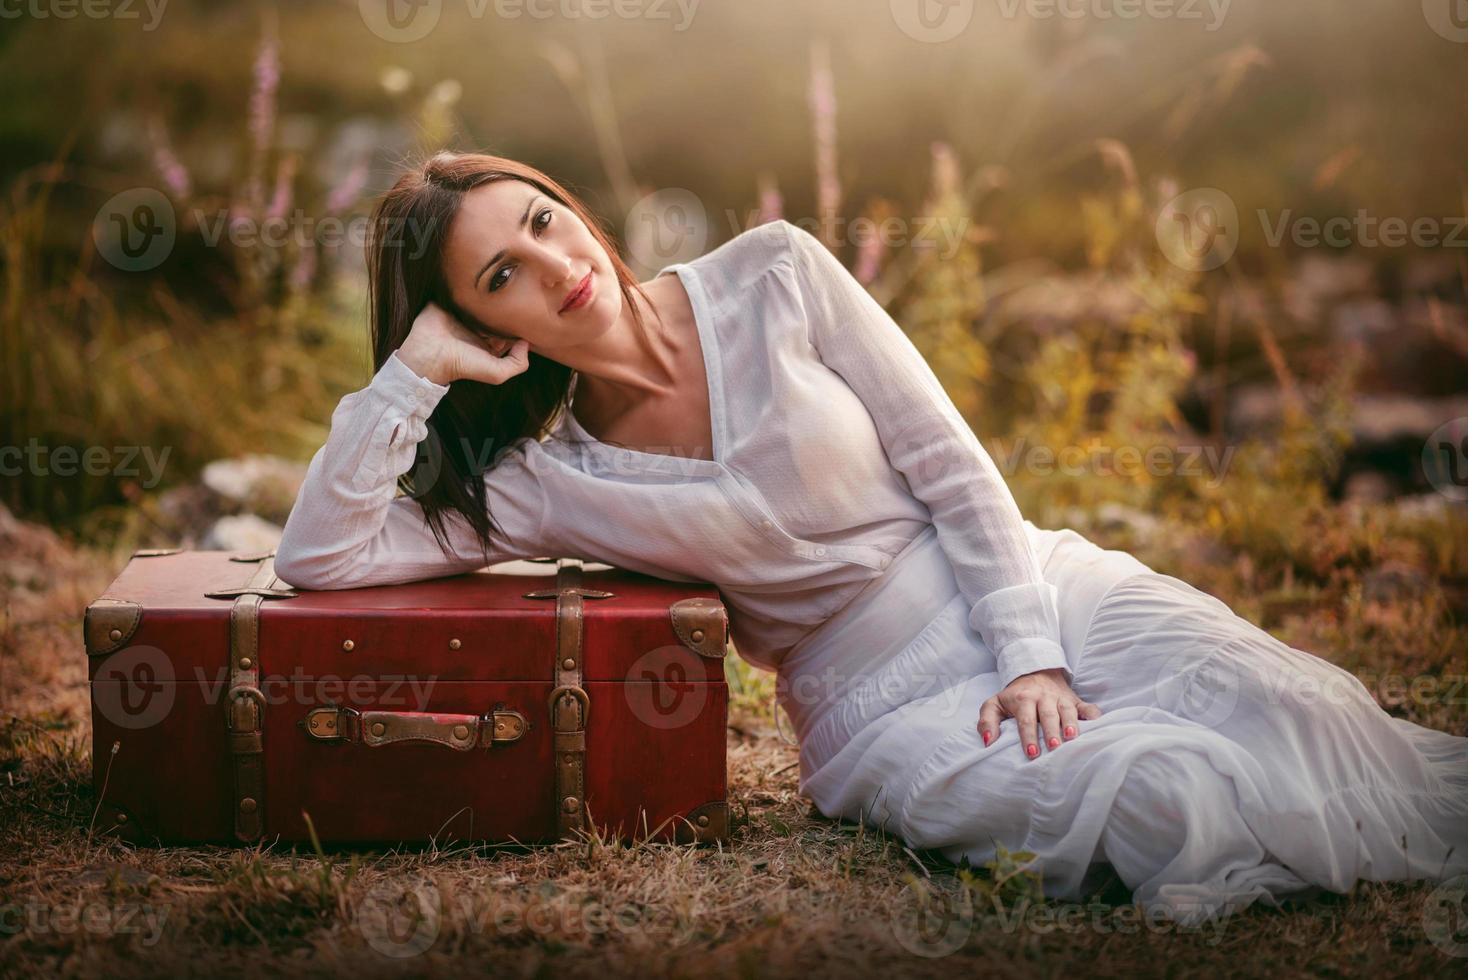 young woman sitting in the field with suitcase photo